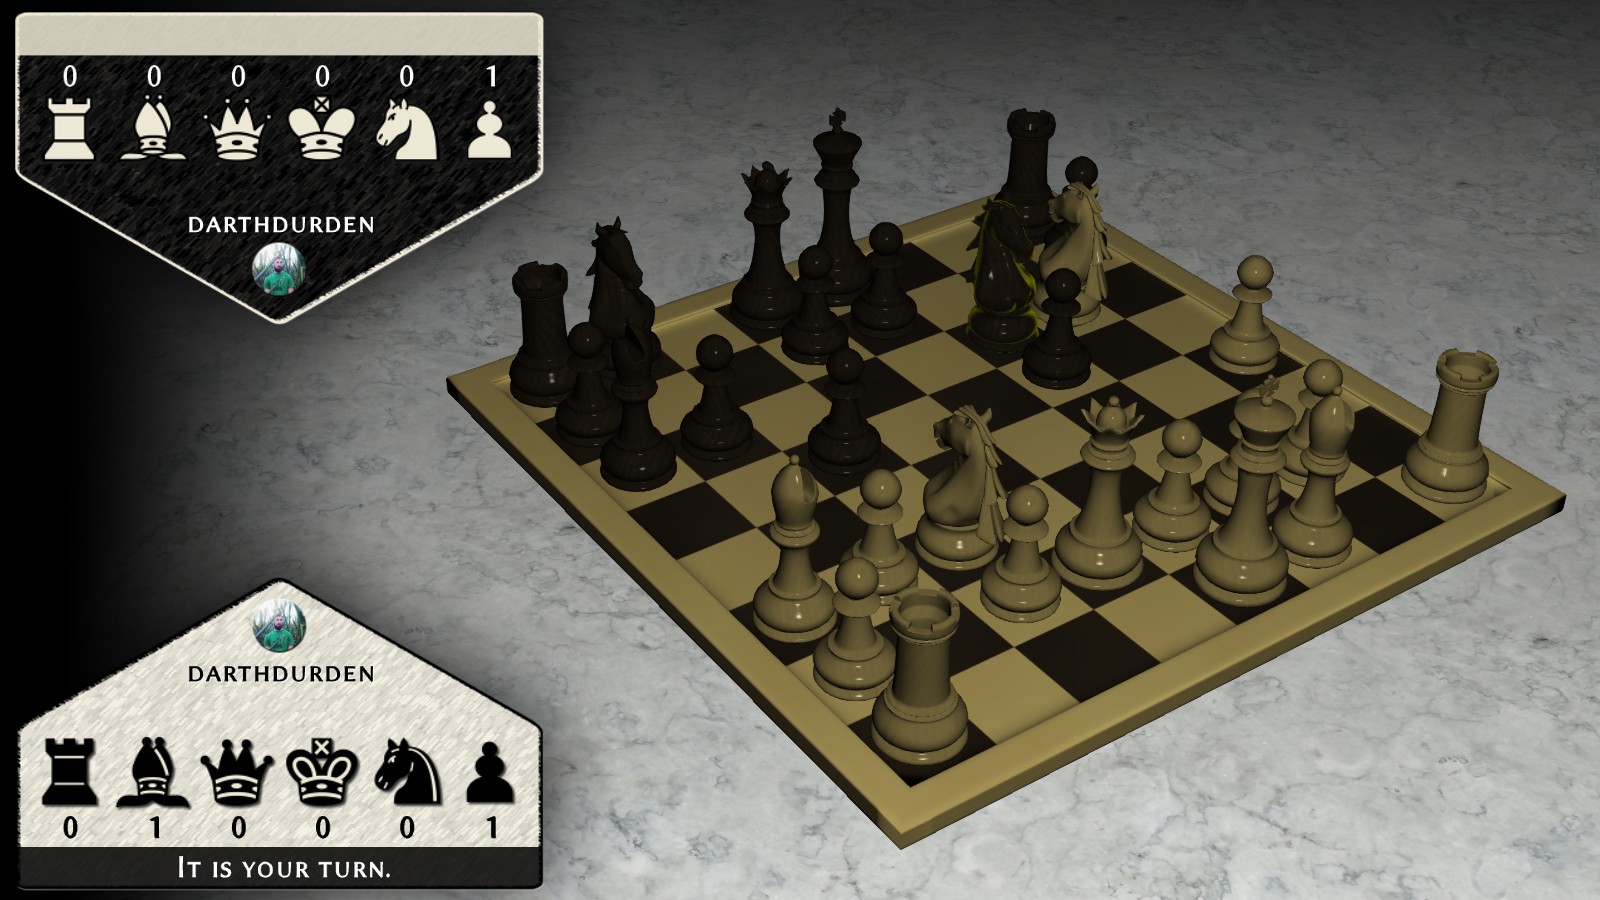 Simply Chess on Steam